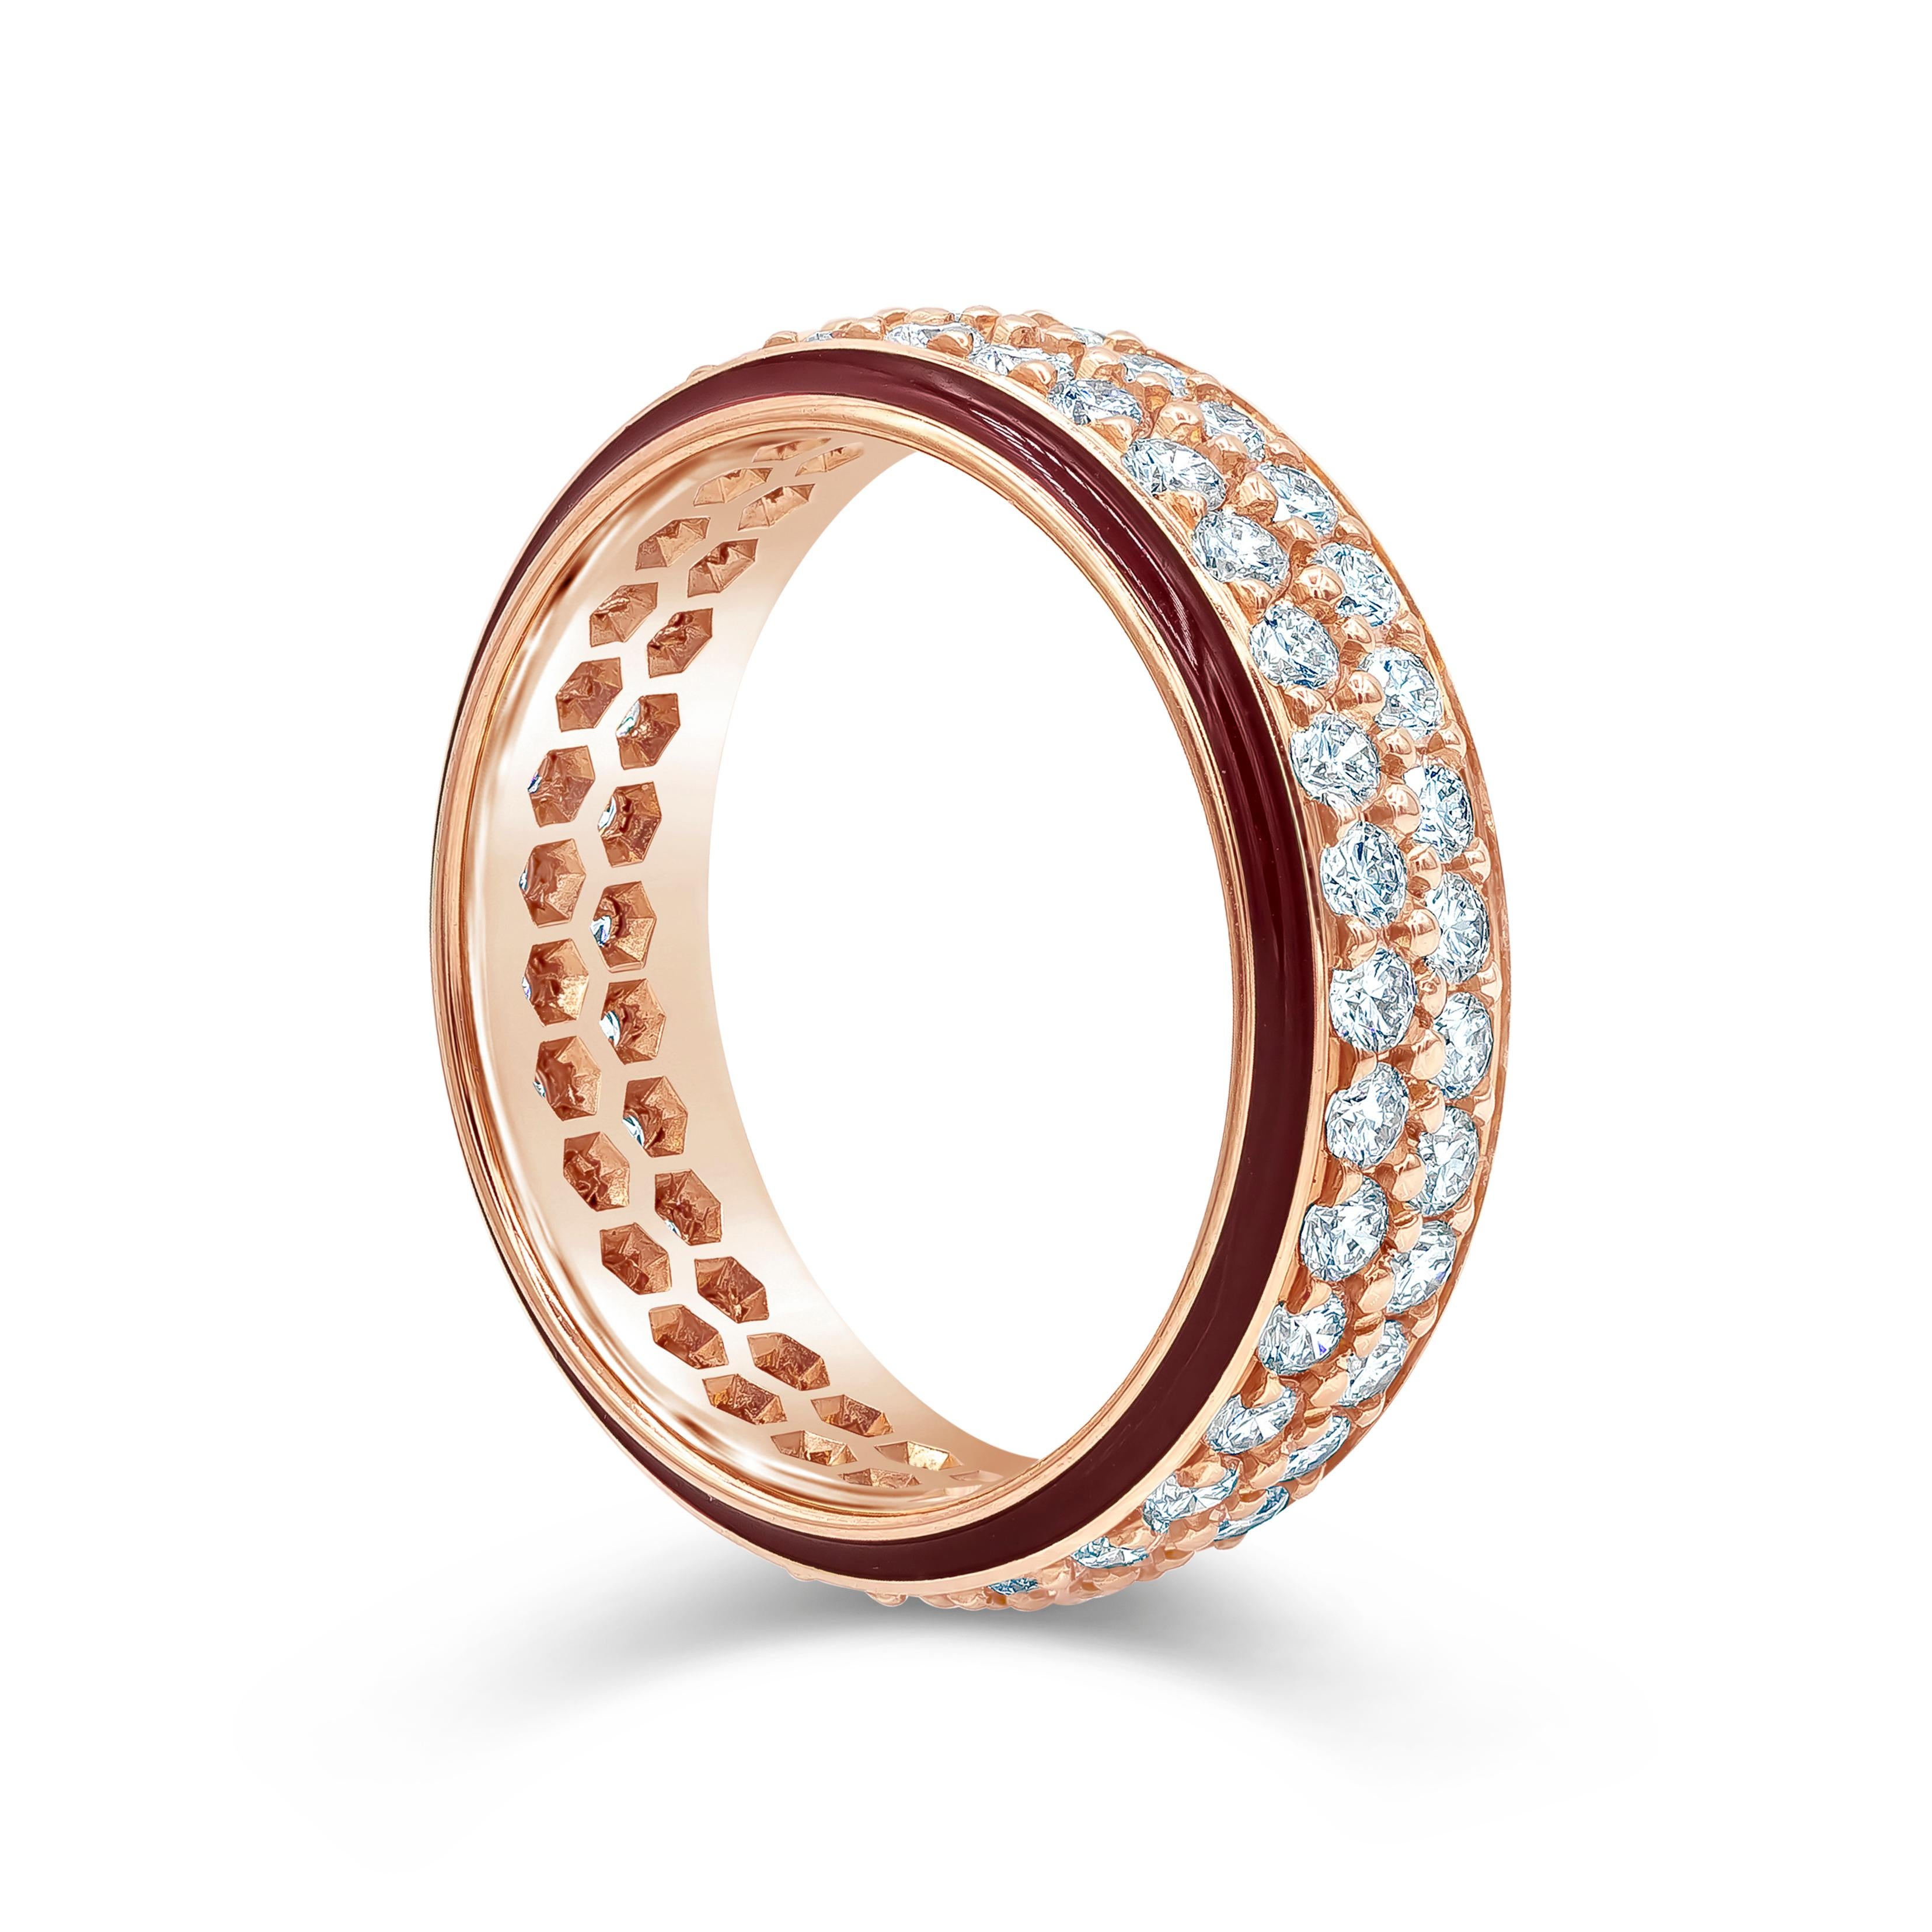 A fashionable and unique ring showcasing two rows of round brilliant diamonds, accented with two rows of red enamel. Diamonds weigh 1.53 carats total, G Color and VS in Clarity. Made with 18K Rose Gold, Size 6.75 US.

Style available in different